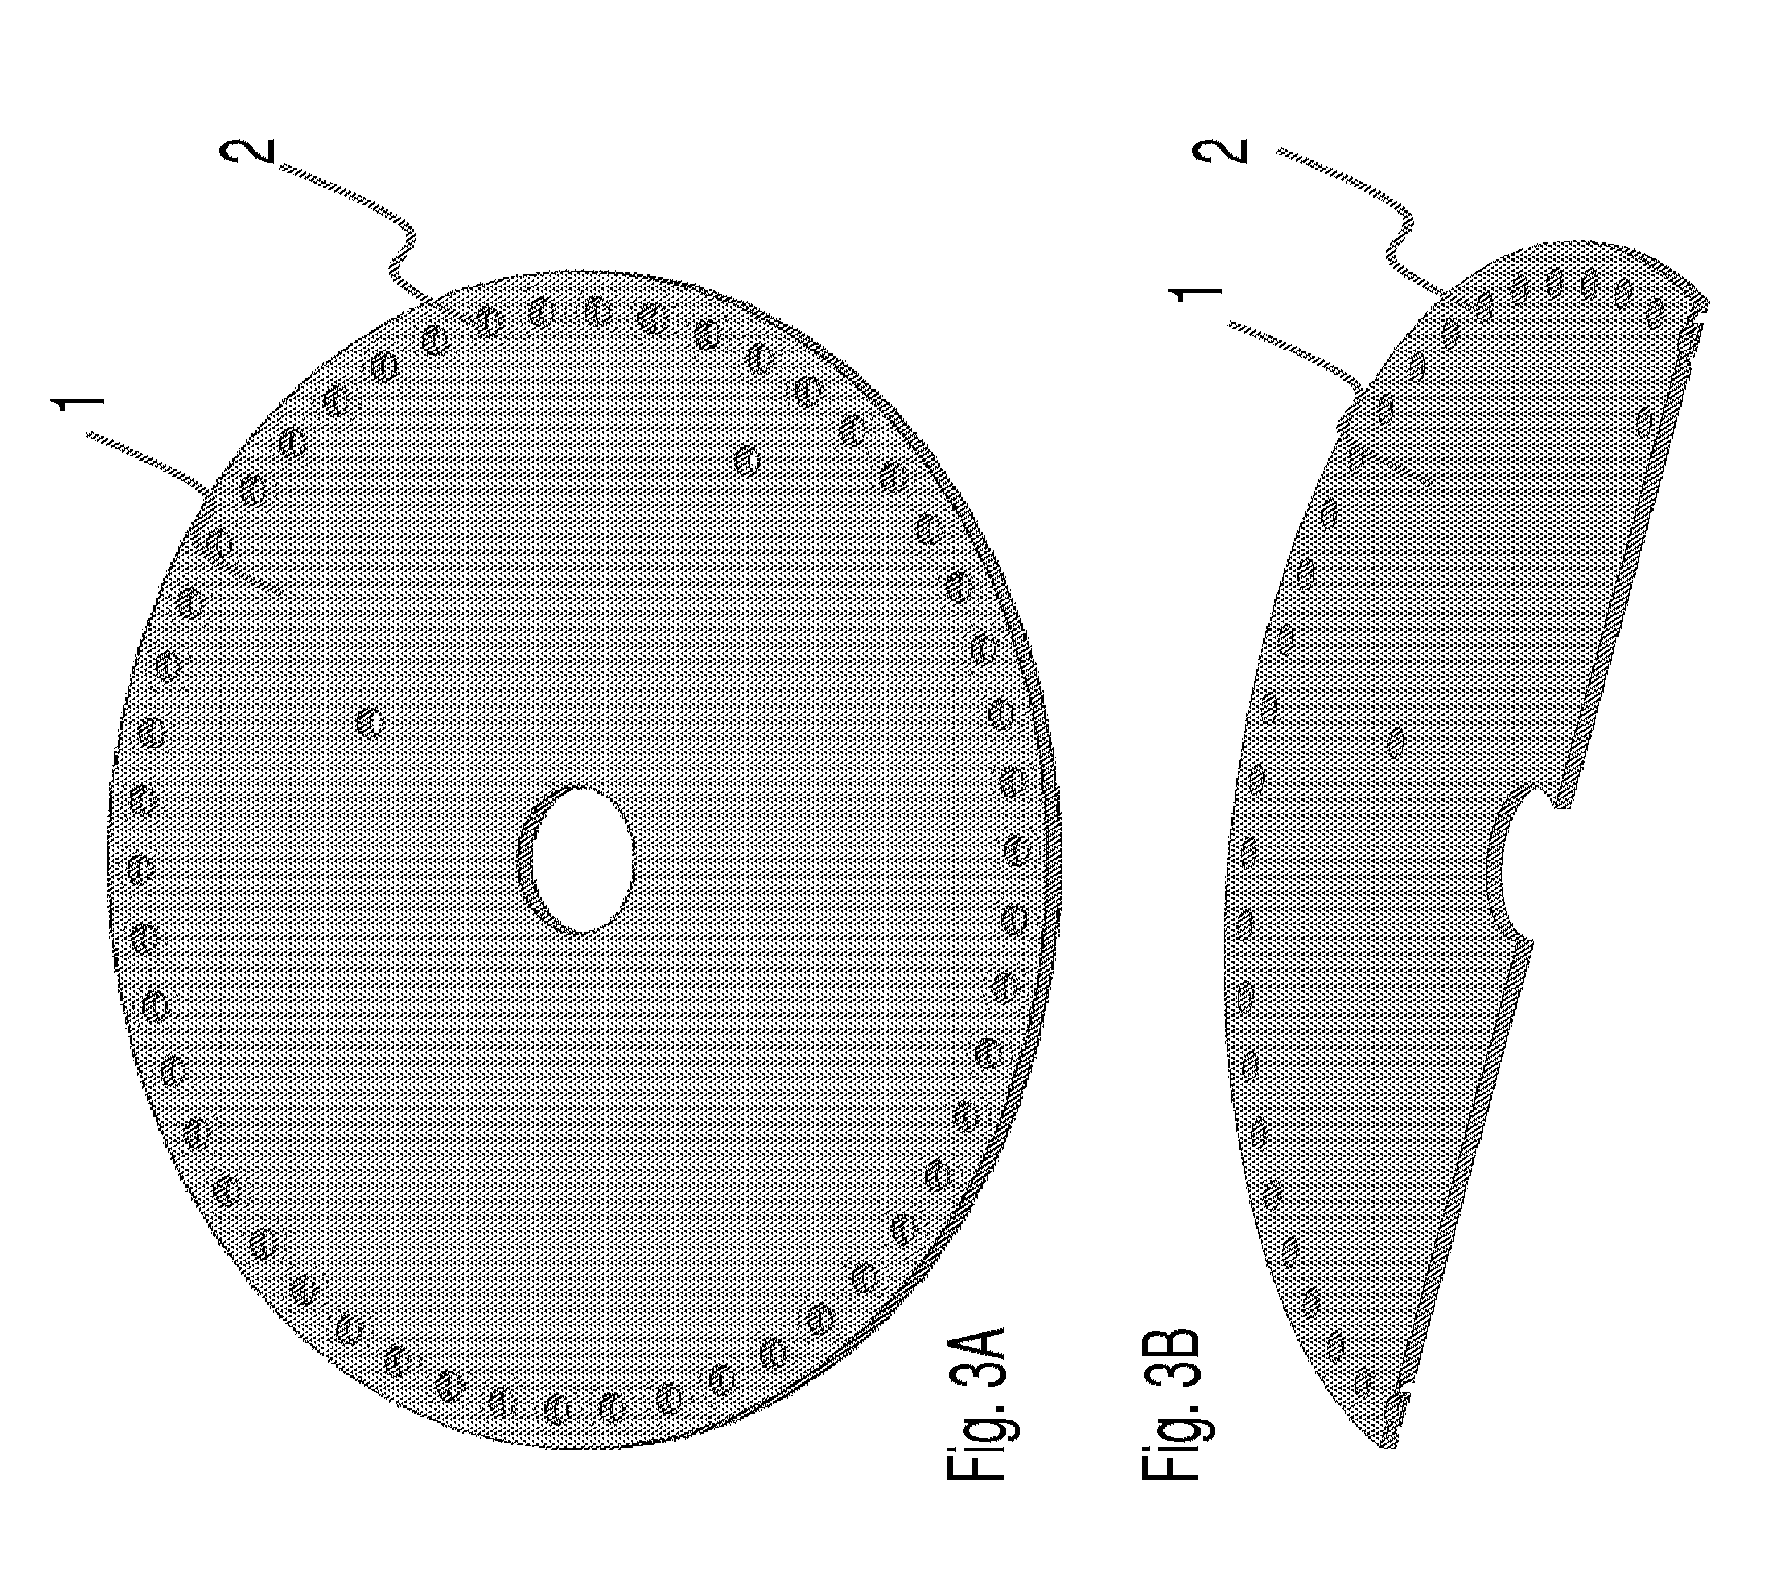 Method and Apparatus for Conducting an Assay